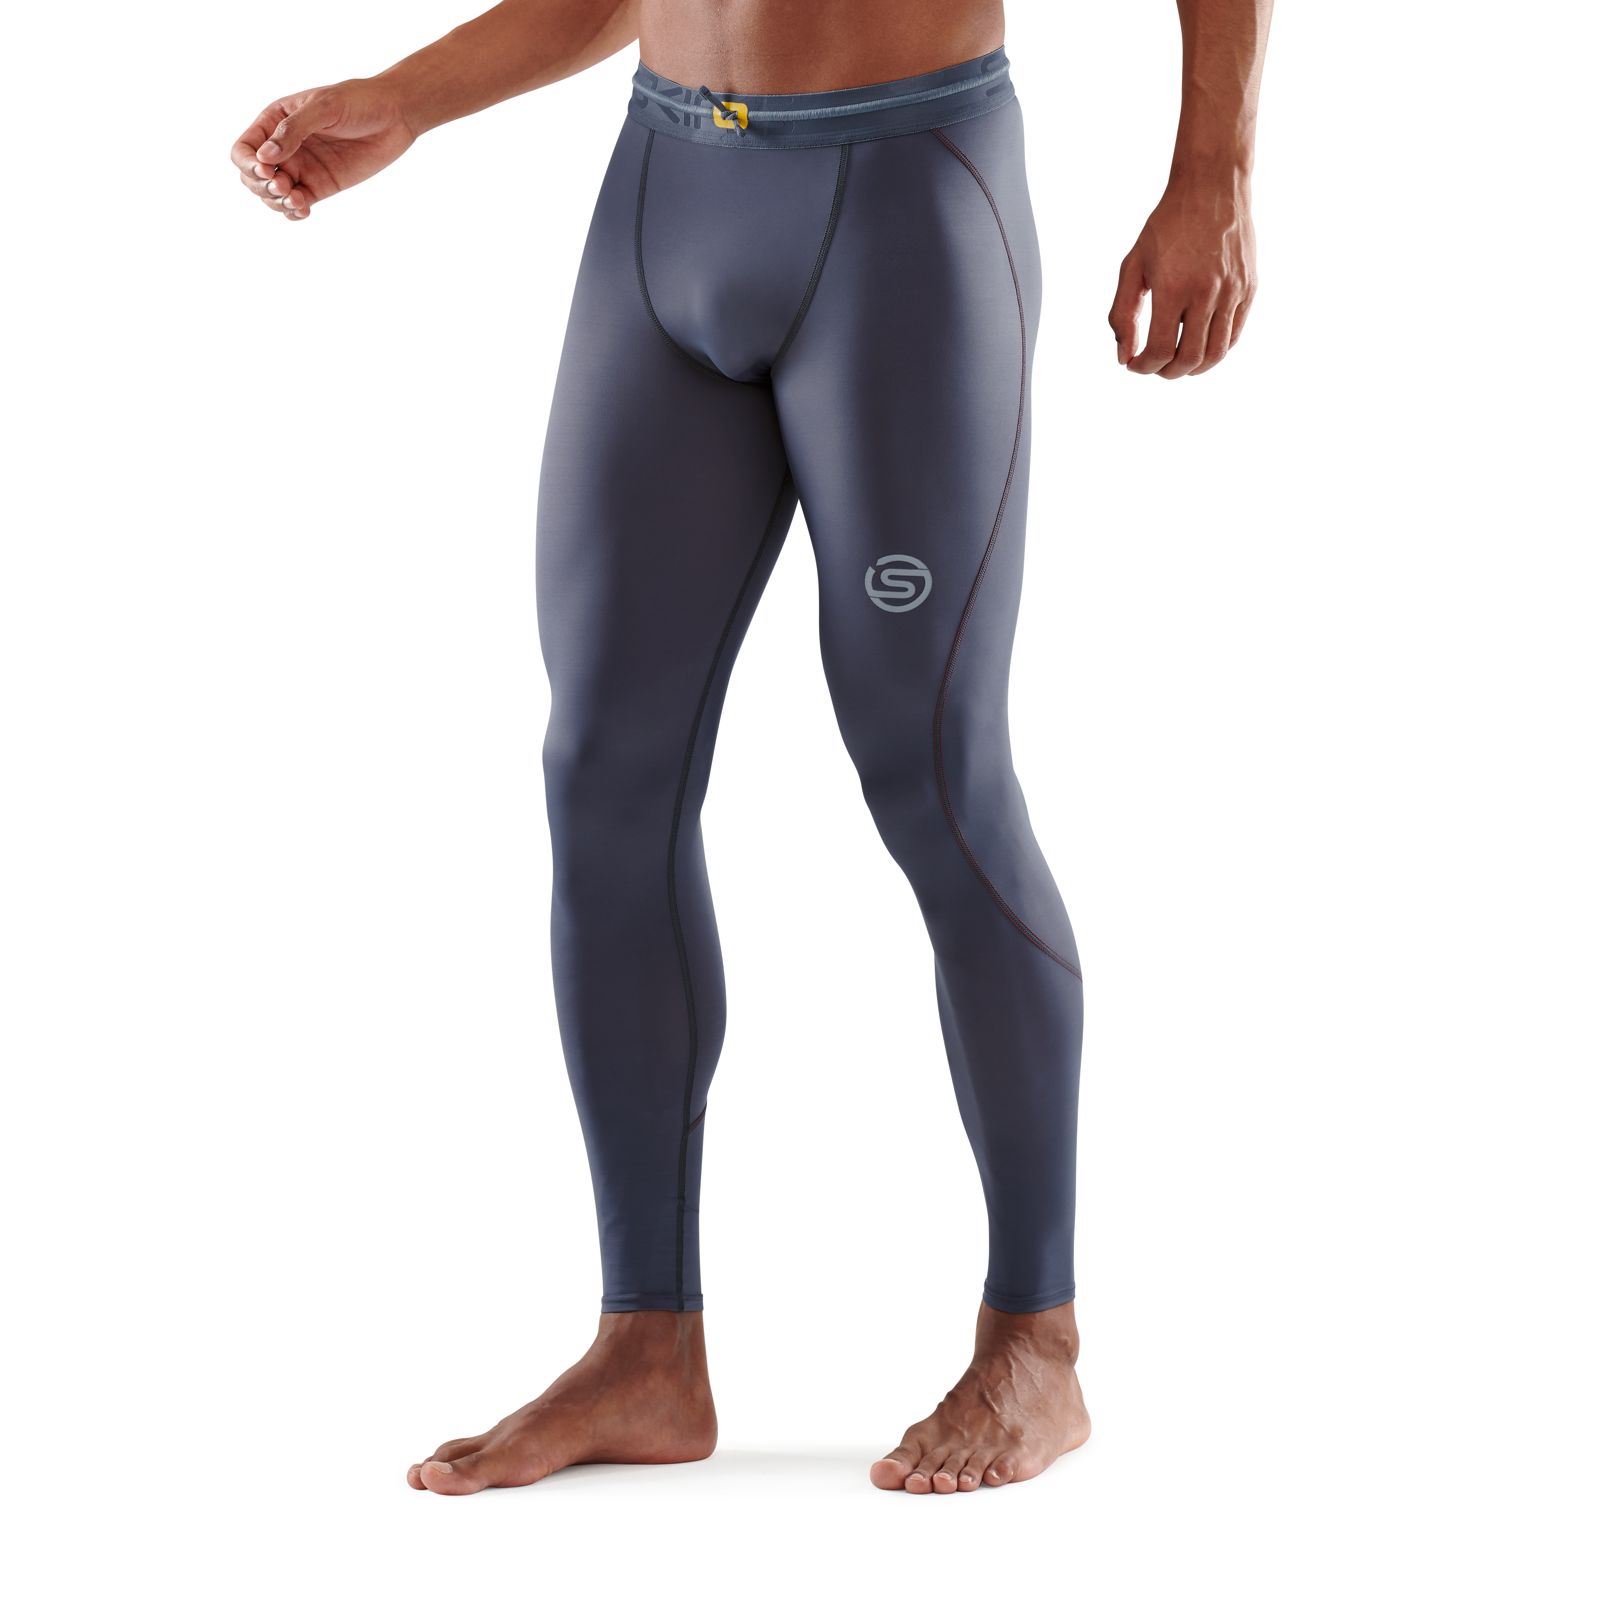 SKINS Men's Compression Long Tights 3-Series - Charcoal